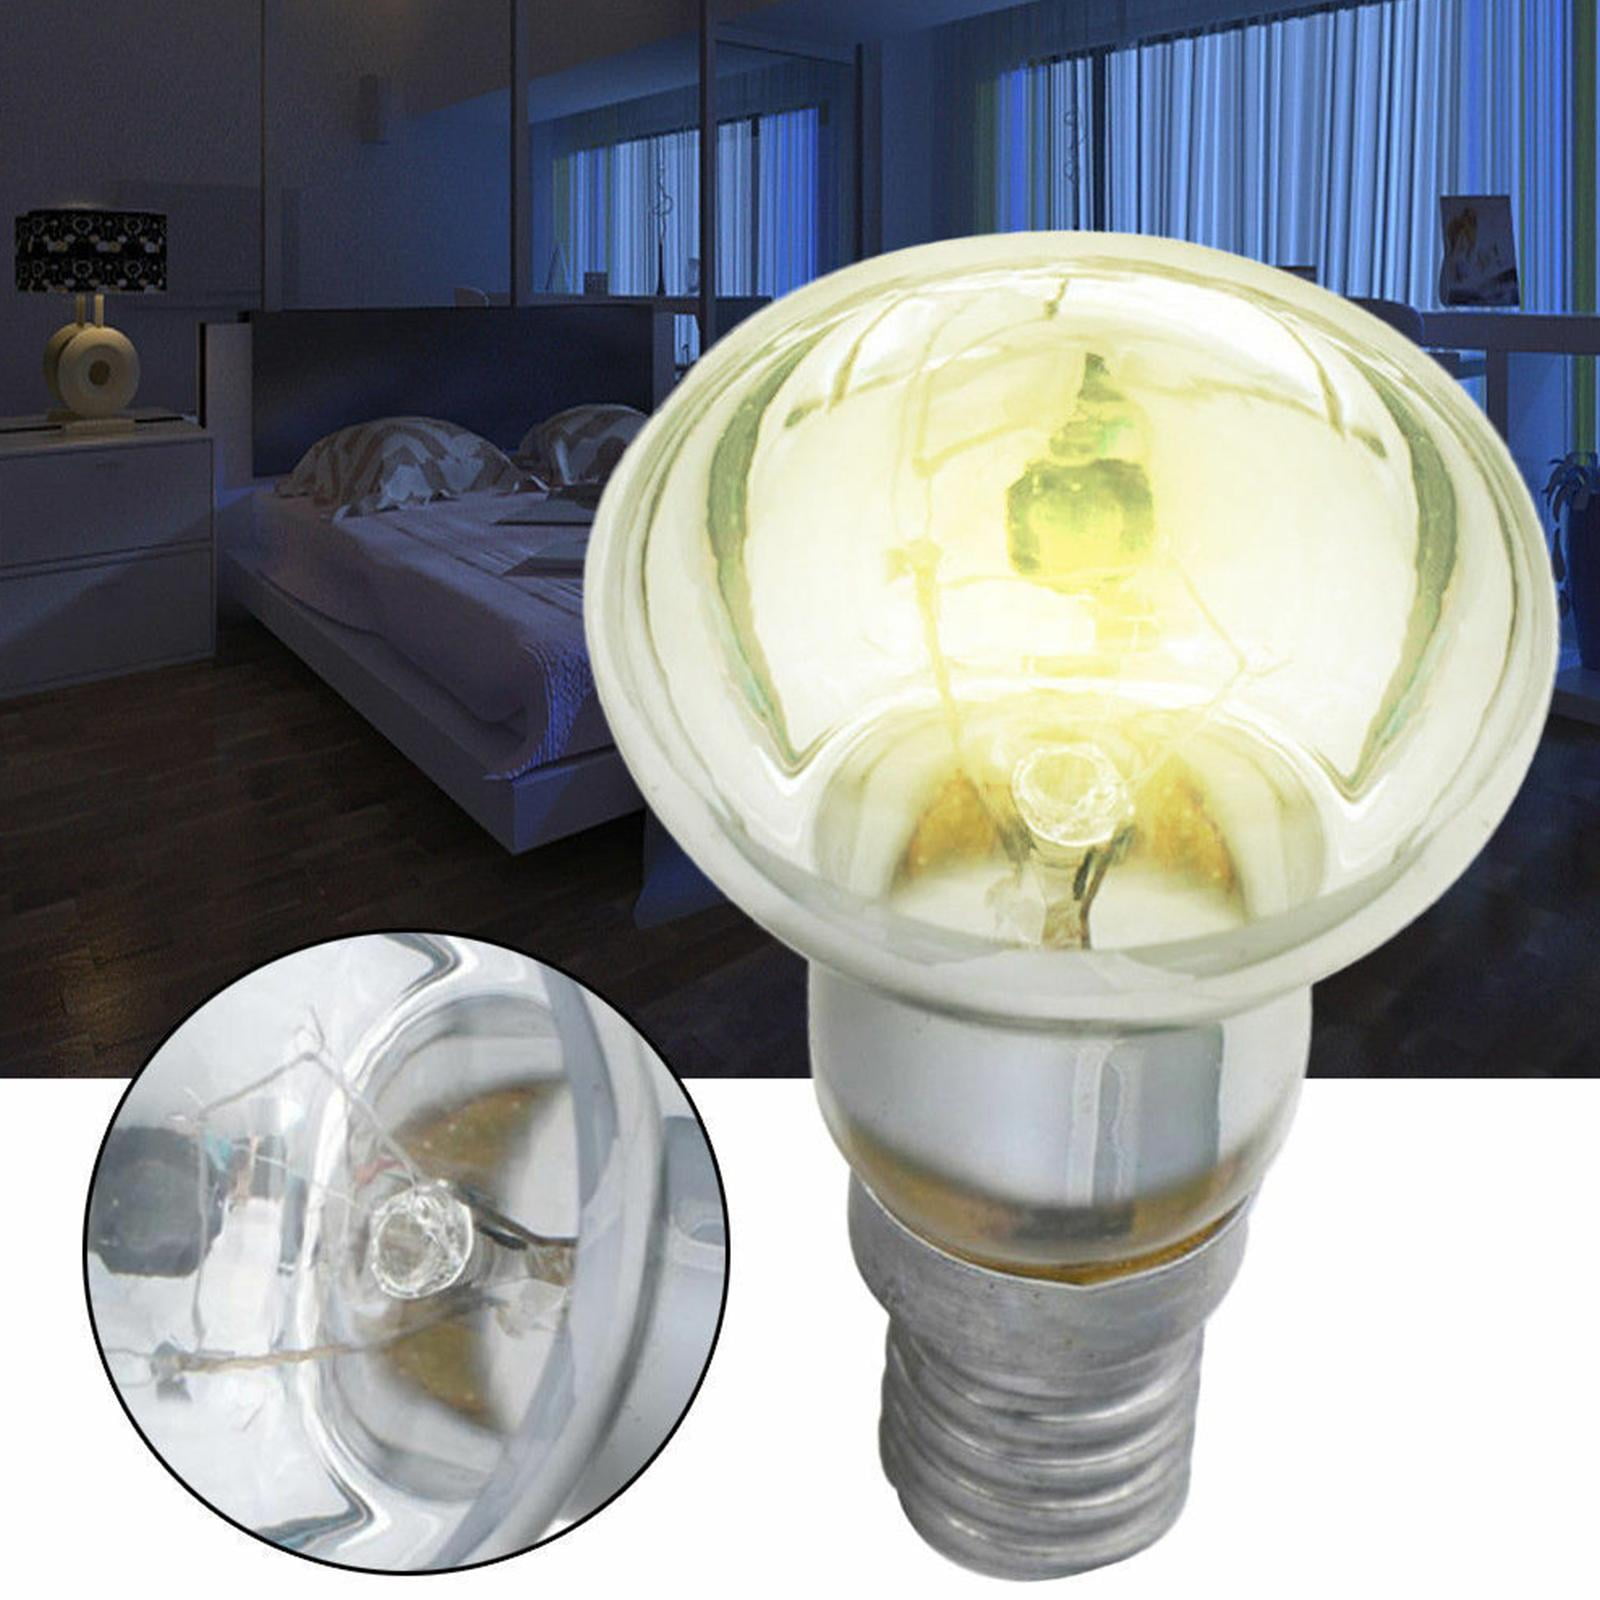 Buy Kawn R39 E14 30W Spotlight Bulb Reflector Spot Light Lava Replacement  Light Bulb Online In India At Discounted Prices